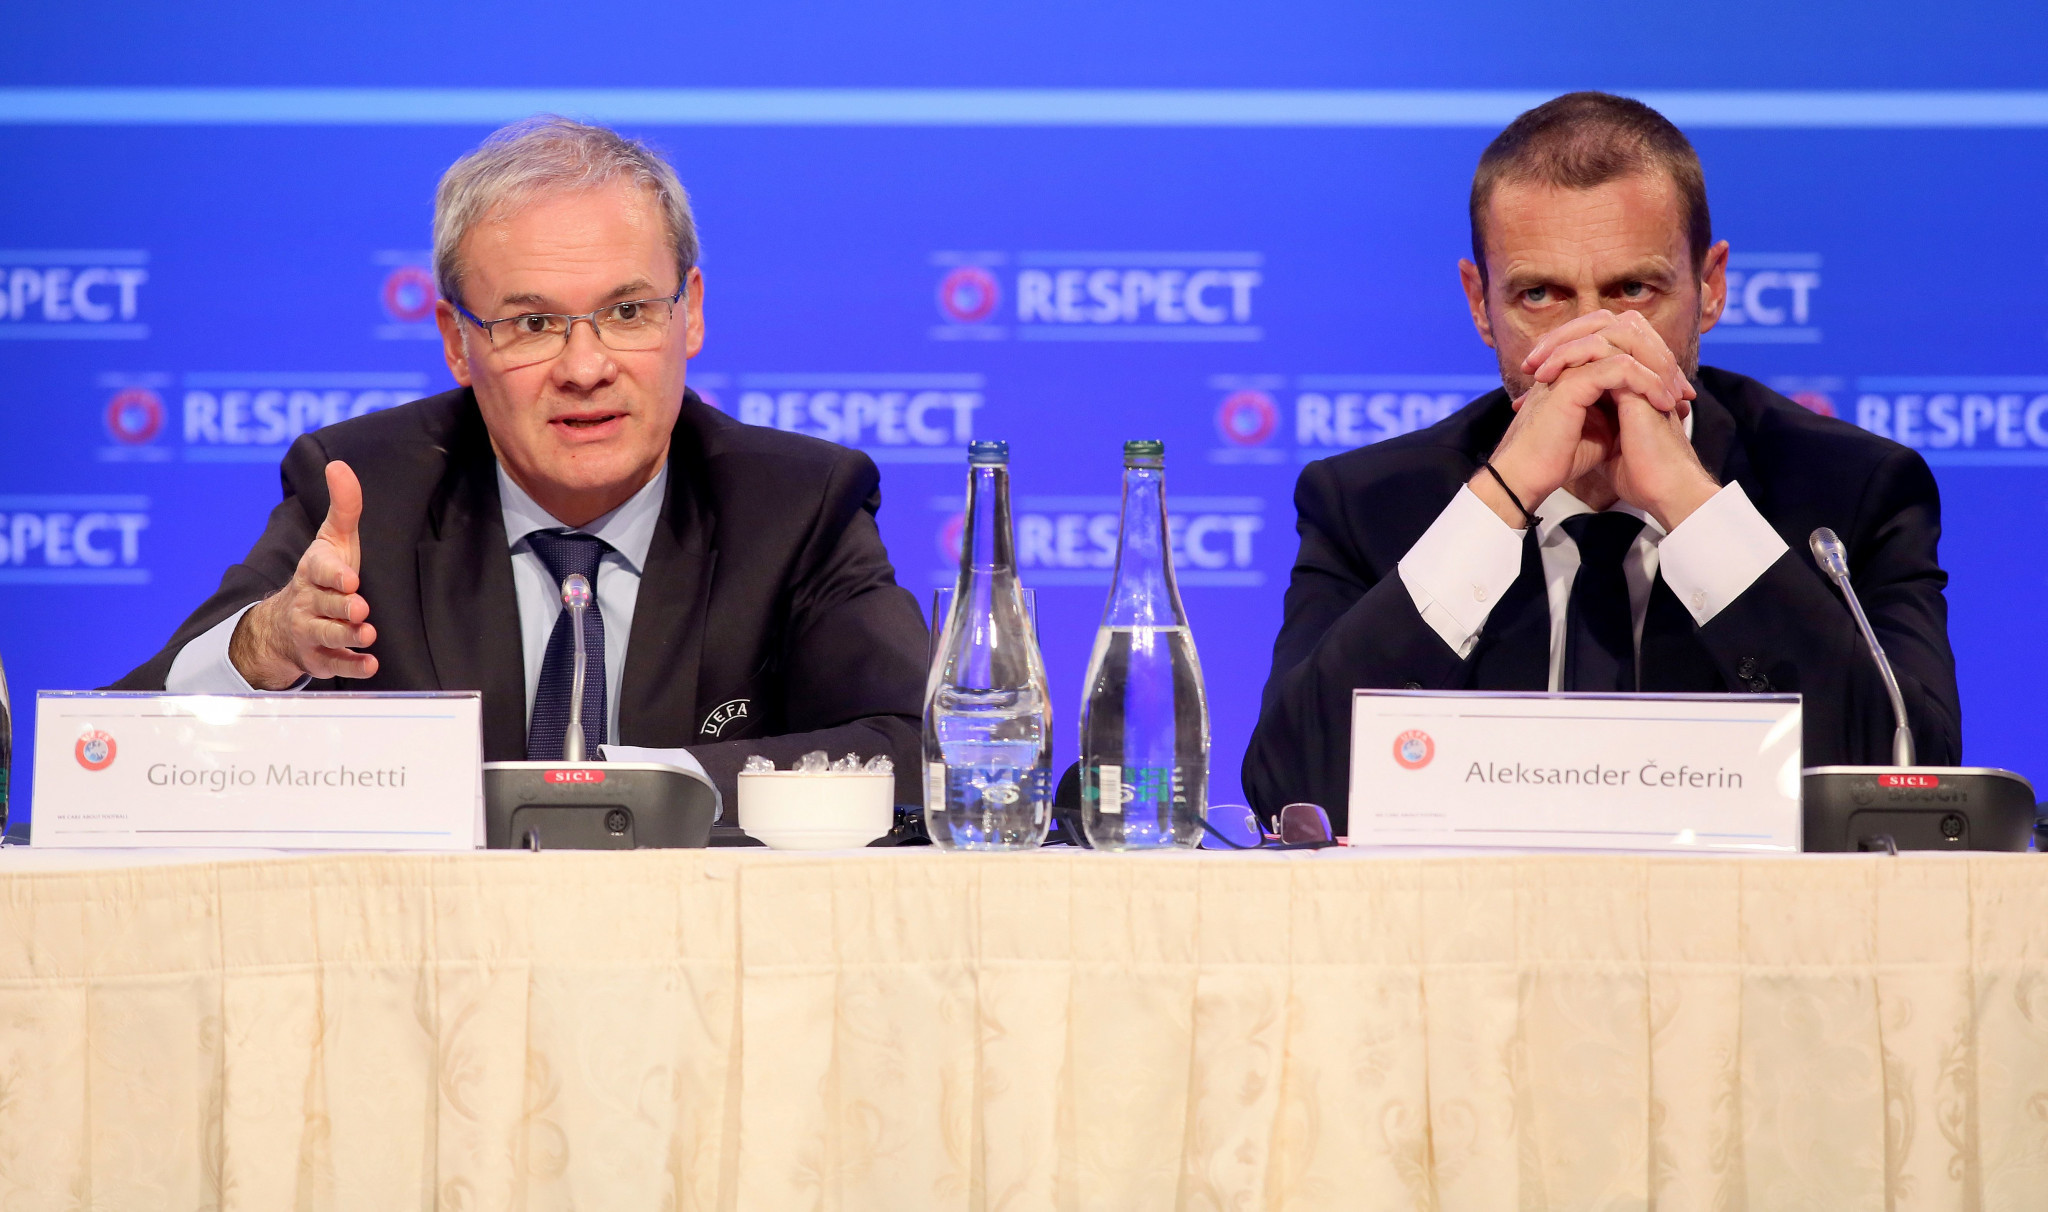 Čeferin set for re-election as UEFA signs MoU with European Club Association prior to Congress